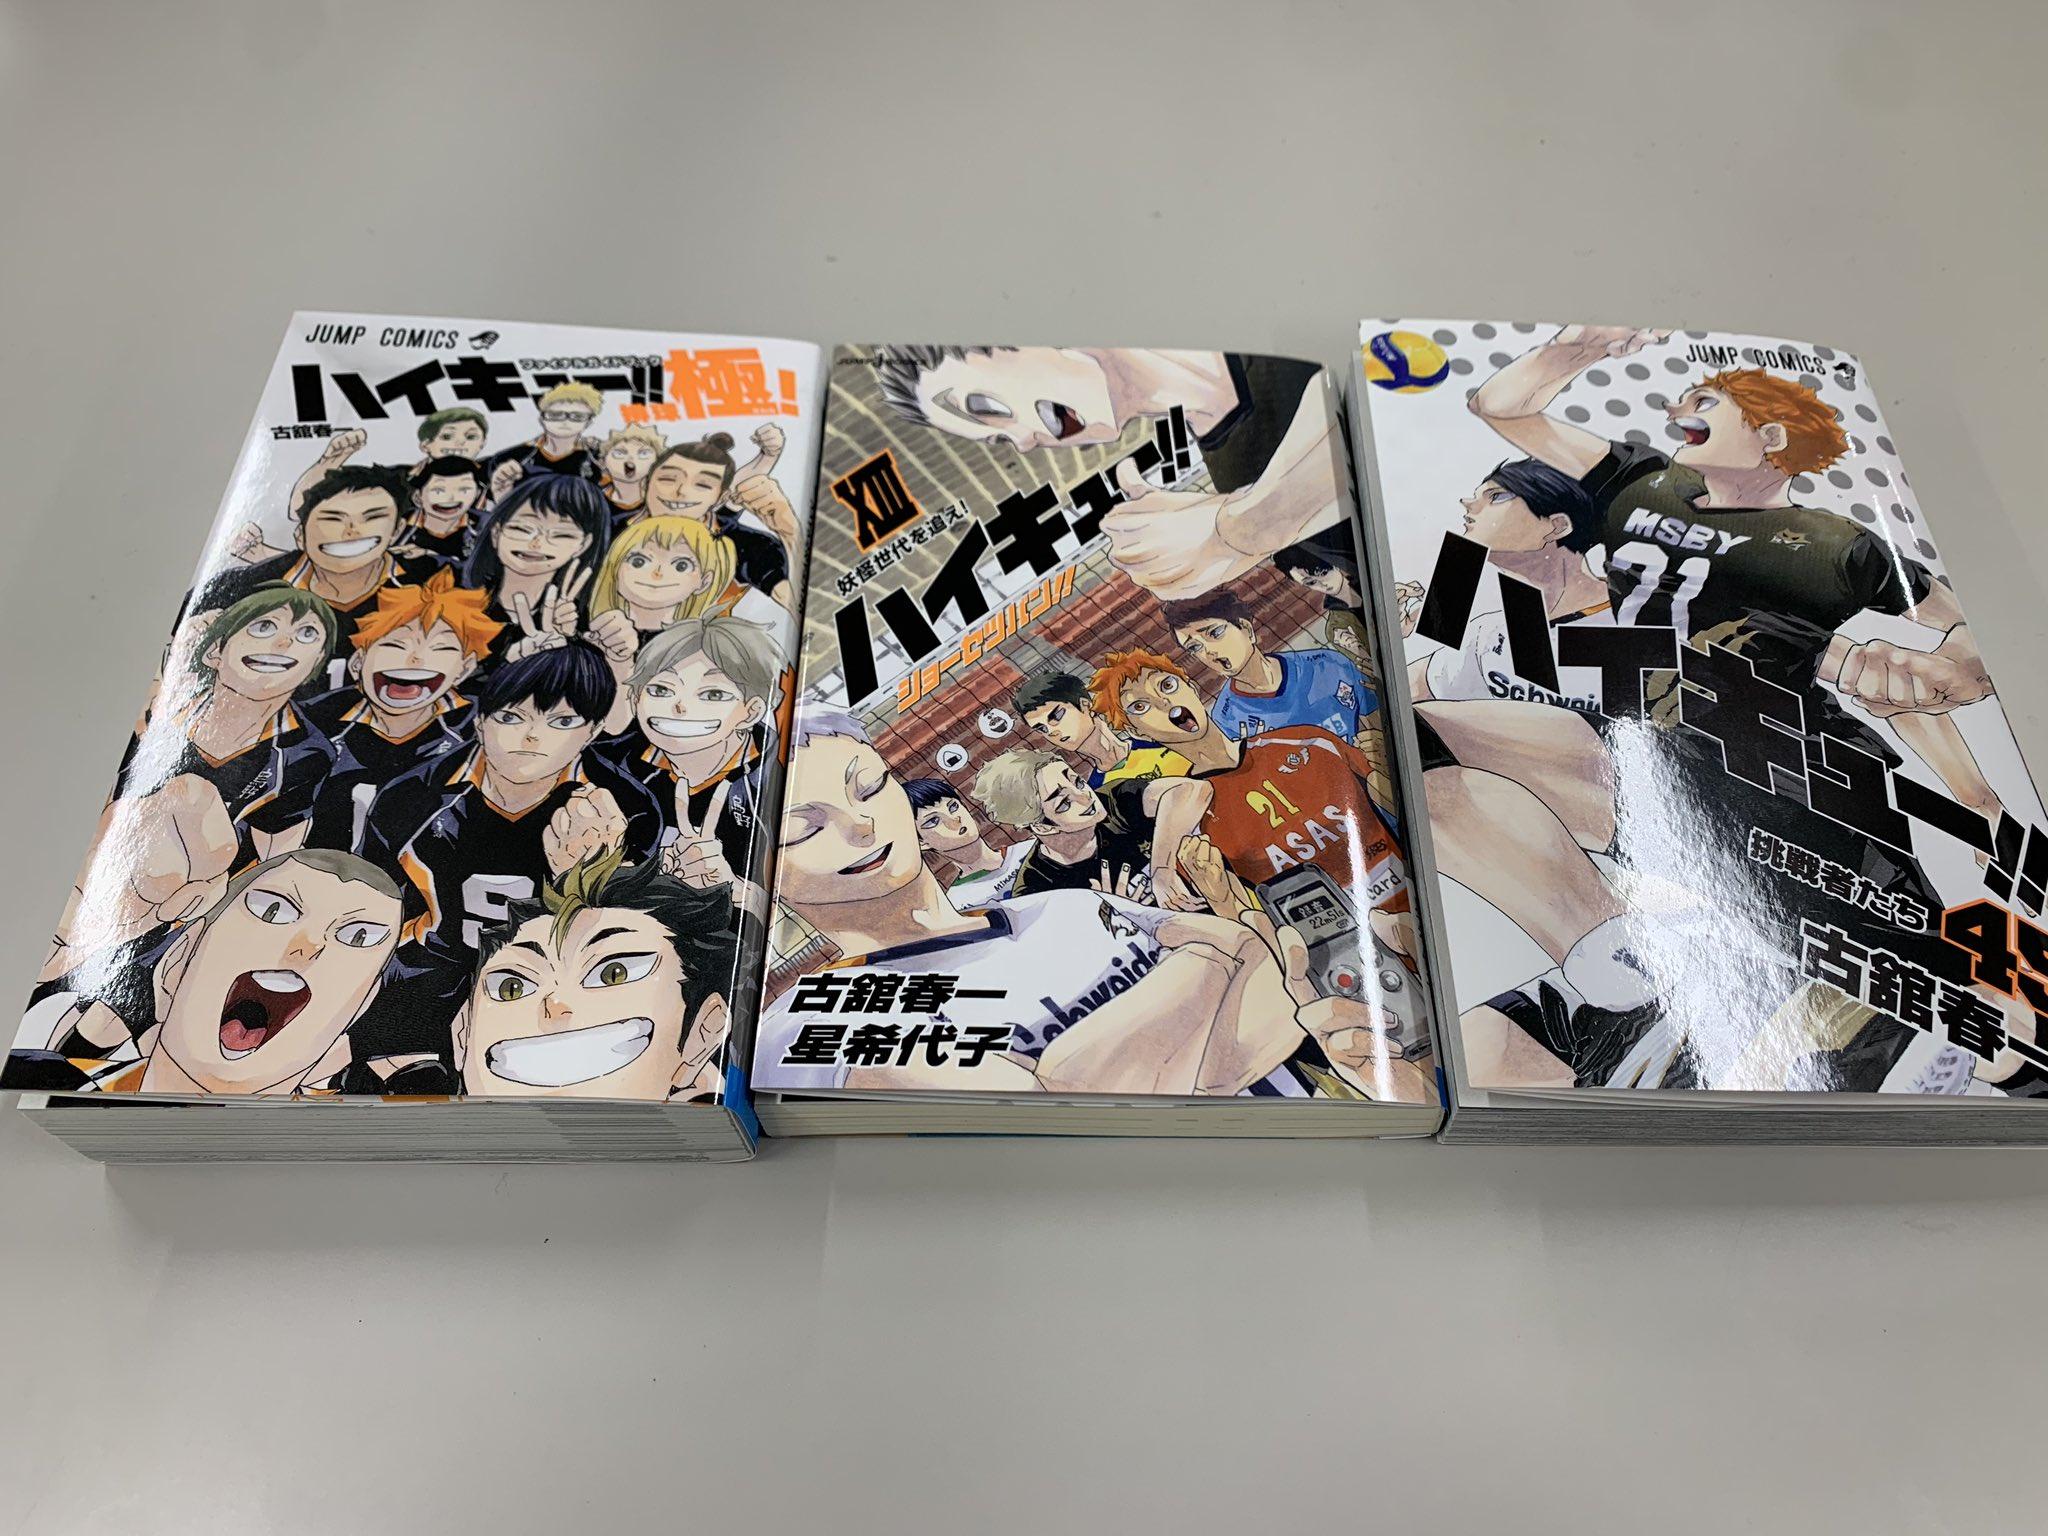 Haikyuu: Where Each Character Ends Up By the Manga's Finale